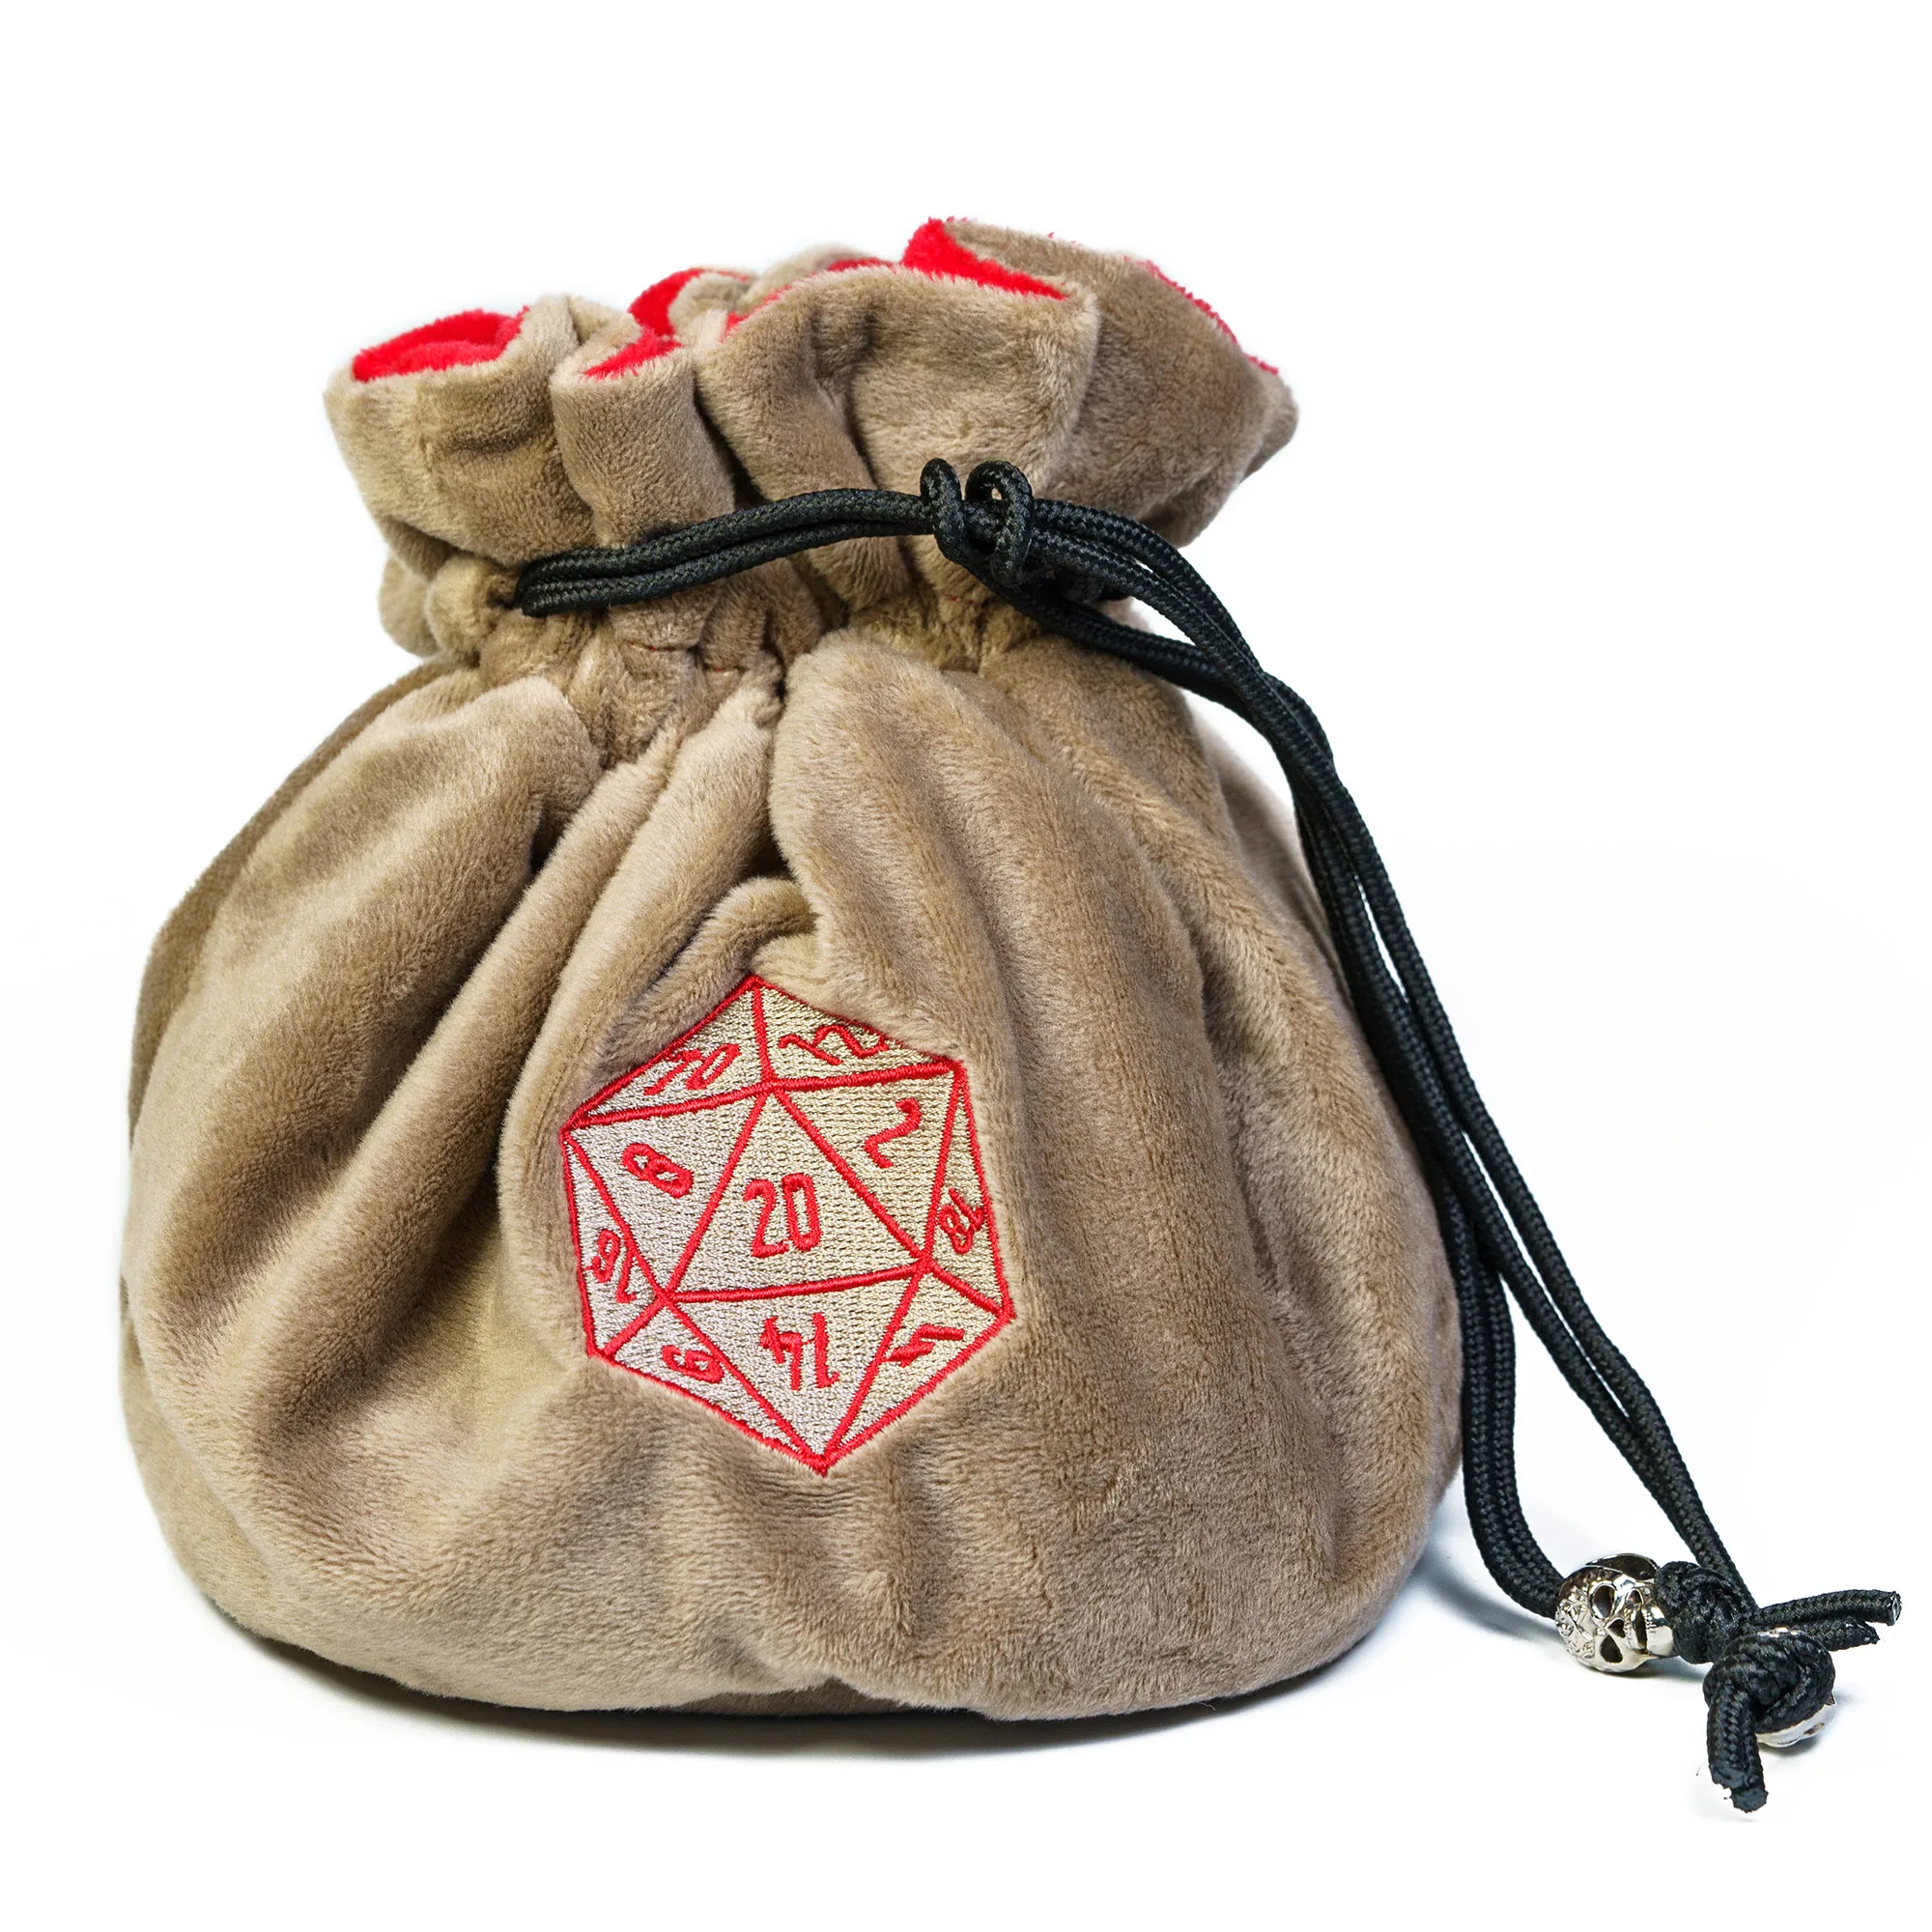 Retro Polyhedral Numbers - Dice Bag – DND